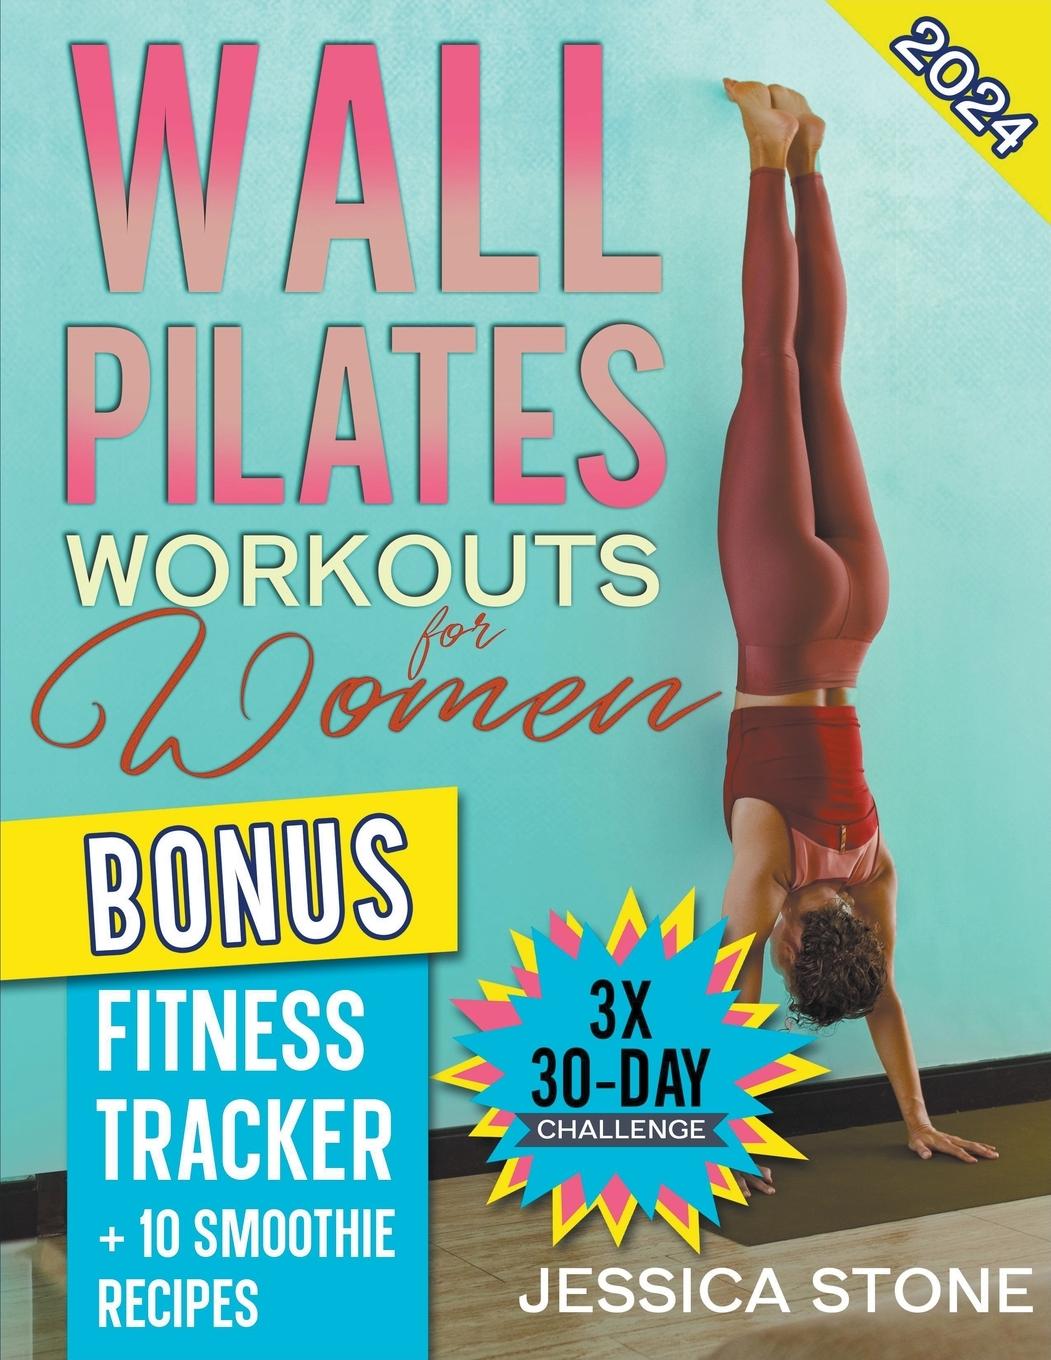 Book Wall Pilates Workouts for Woman 